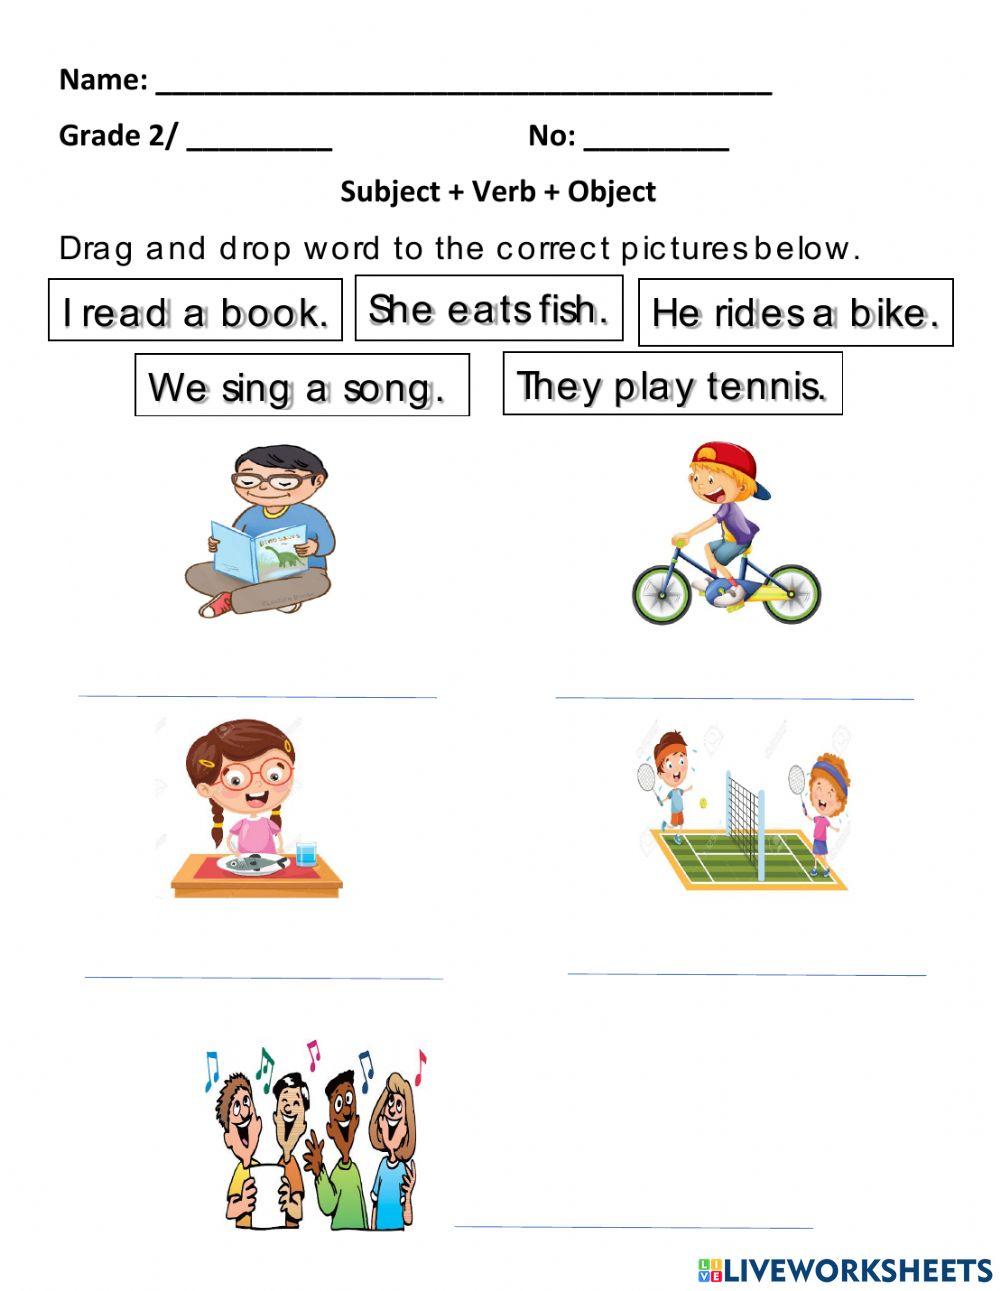 Subject + Verb + Object